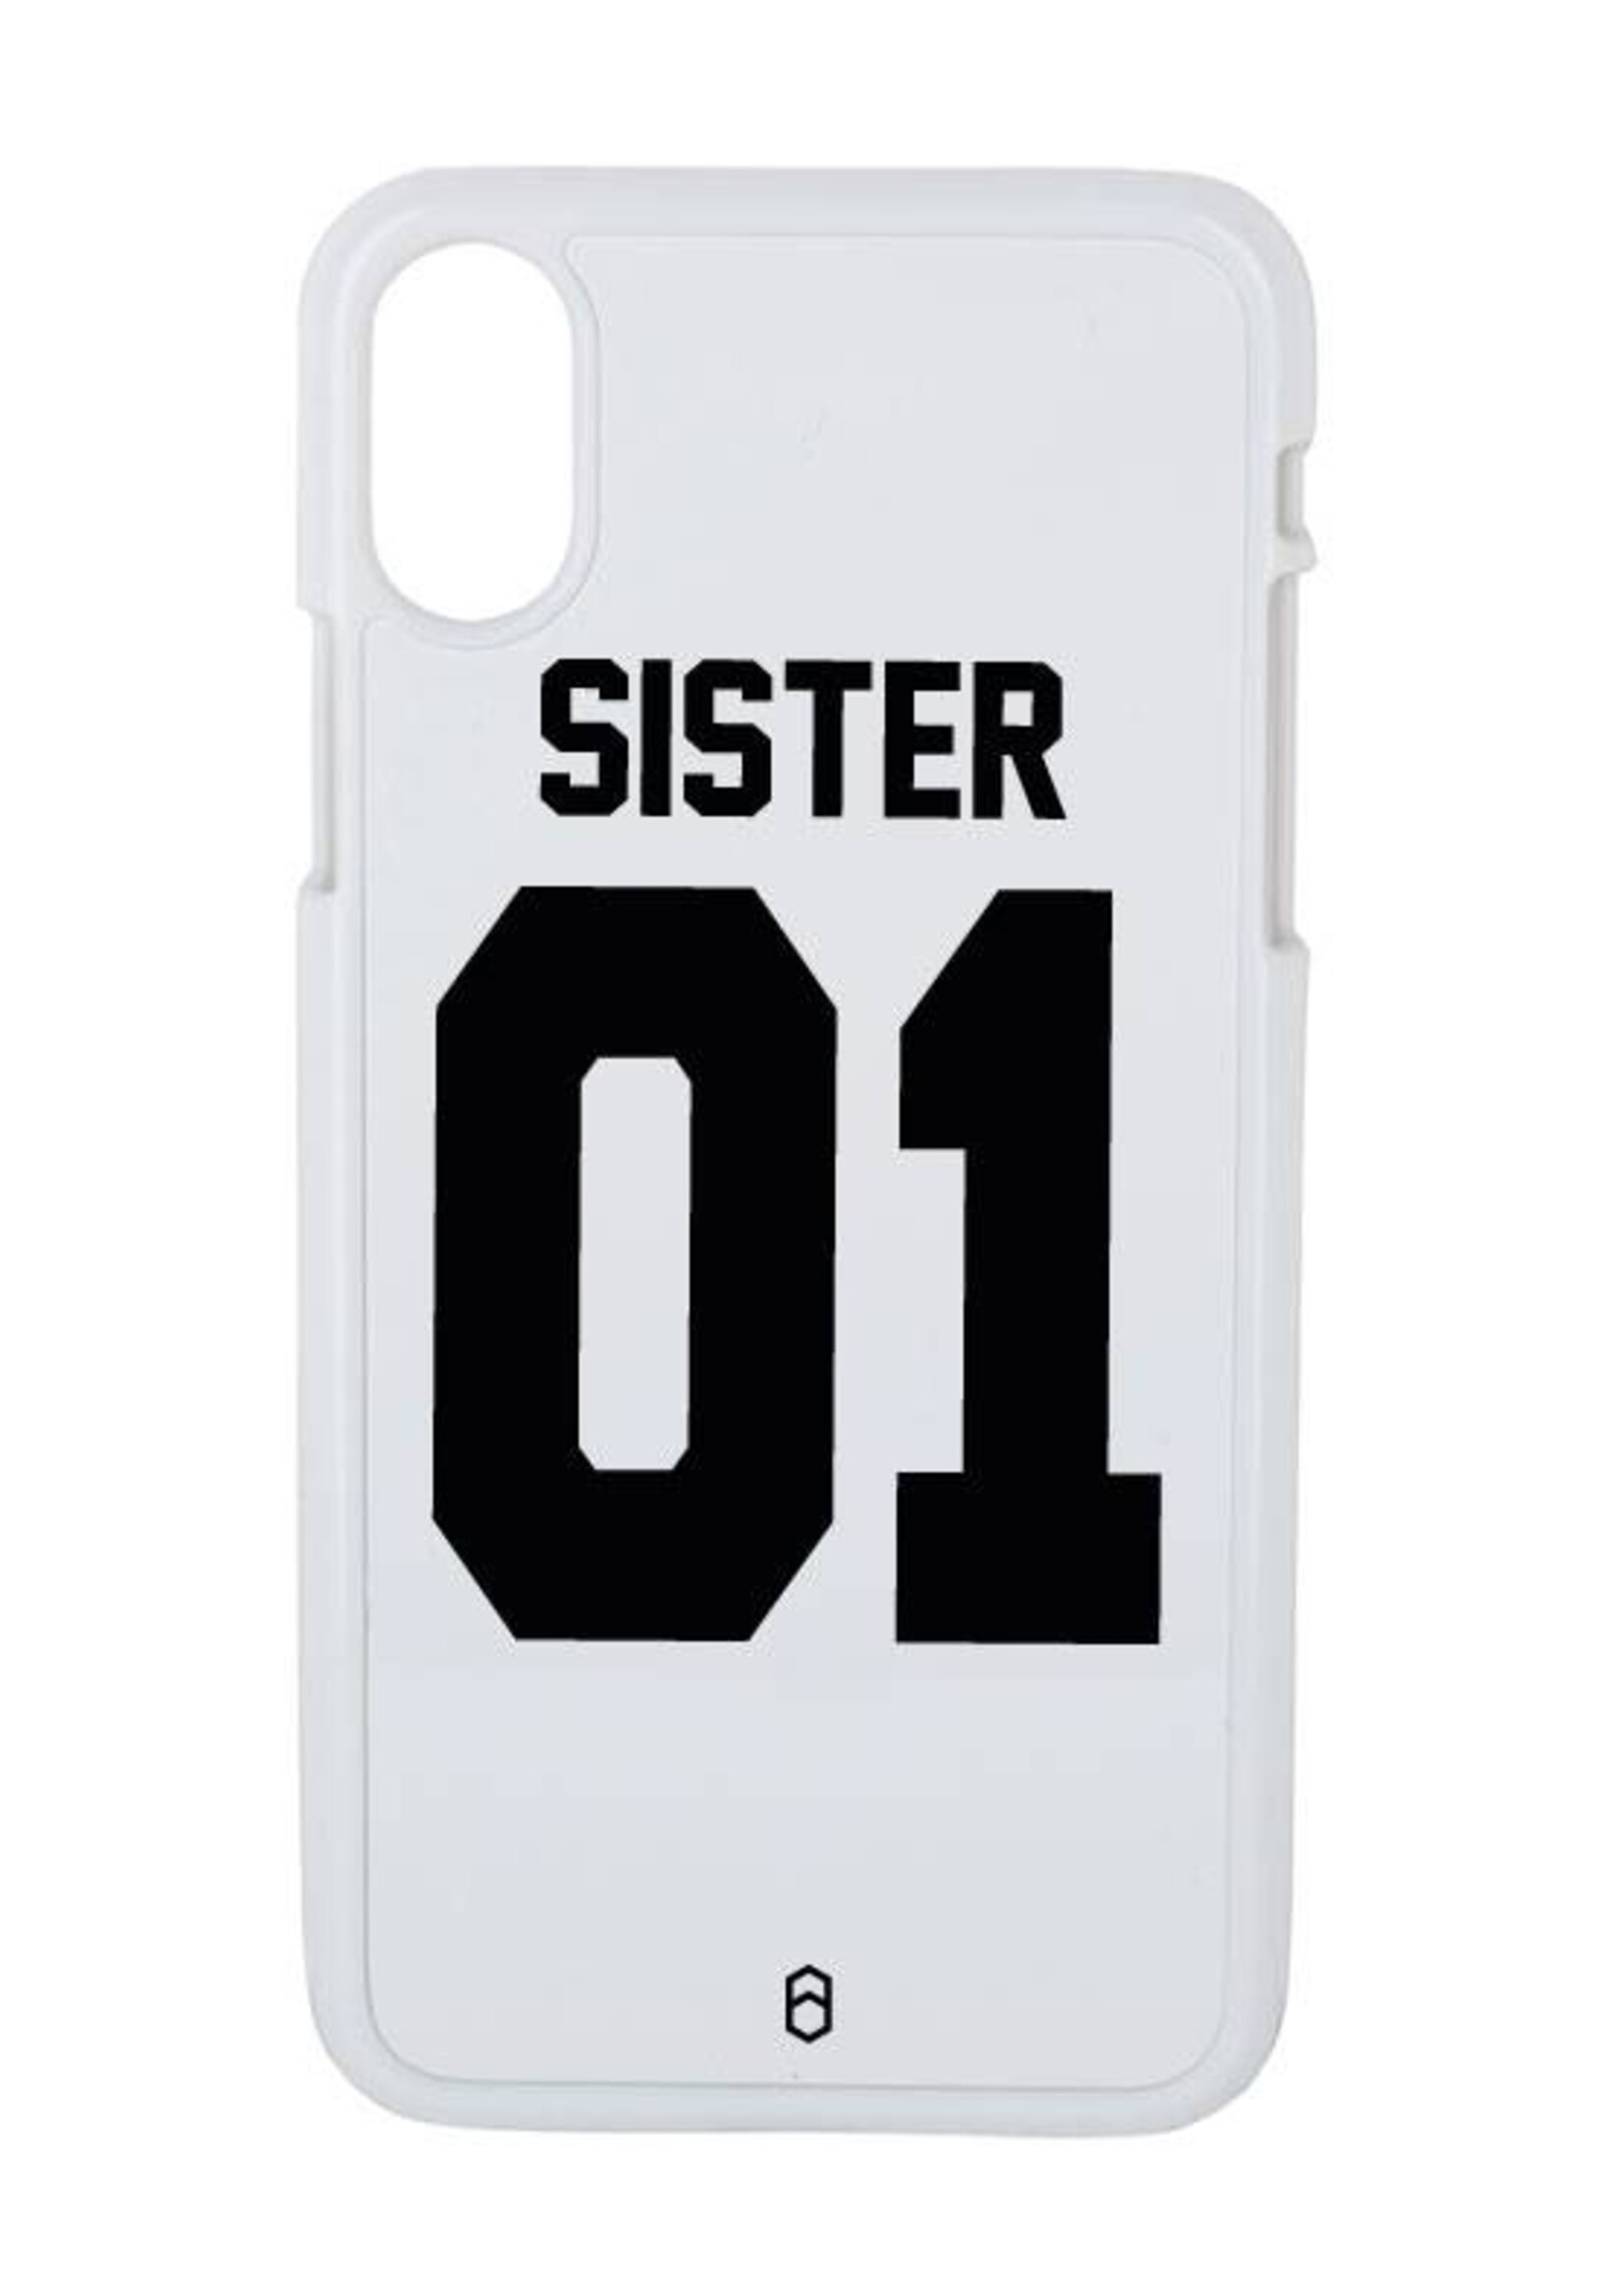 SISTER 01 BFF CASE